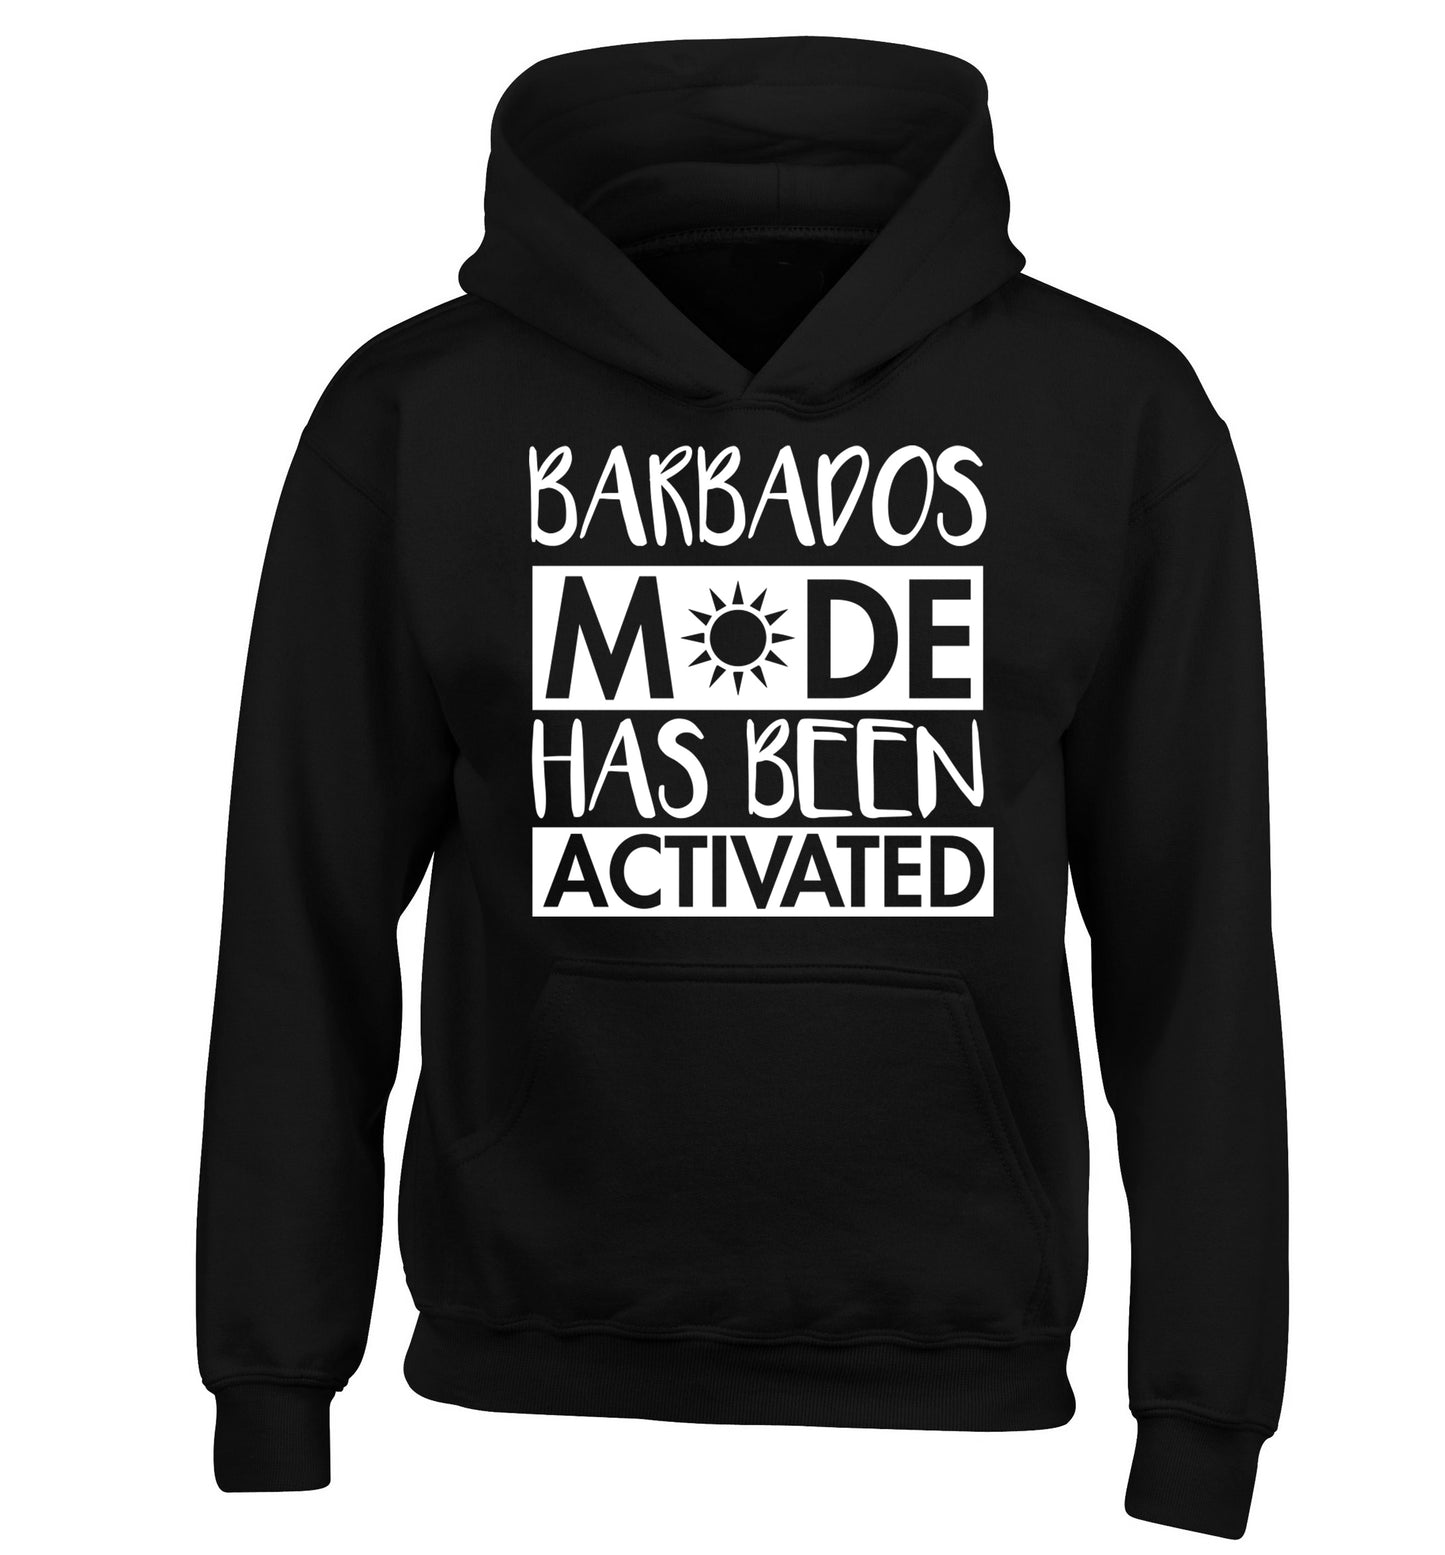 Barbados mode has been activated children's black hoodie 12-13 Years